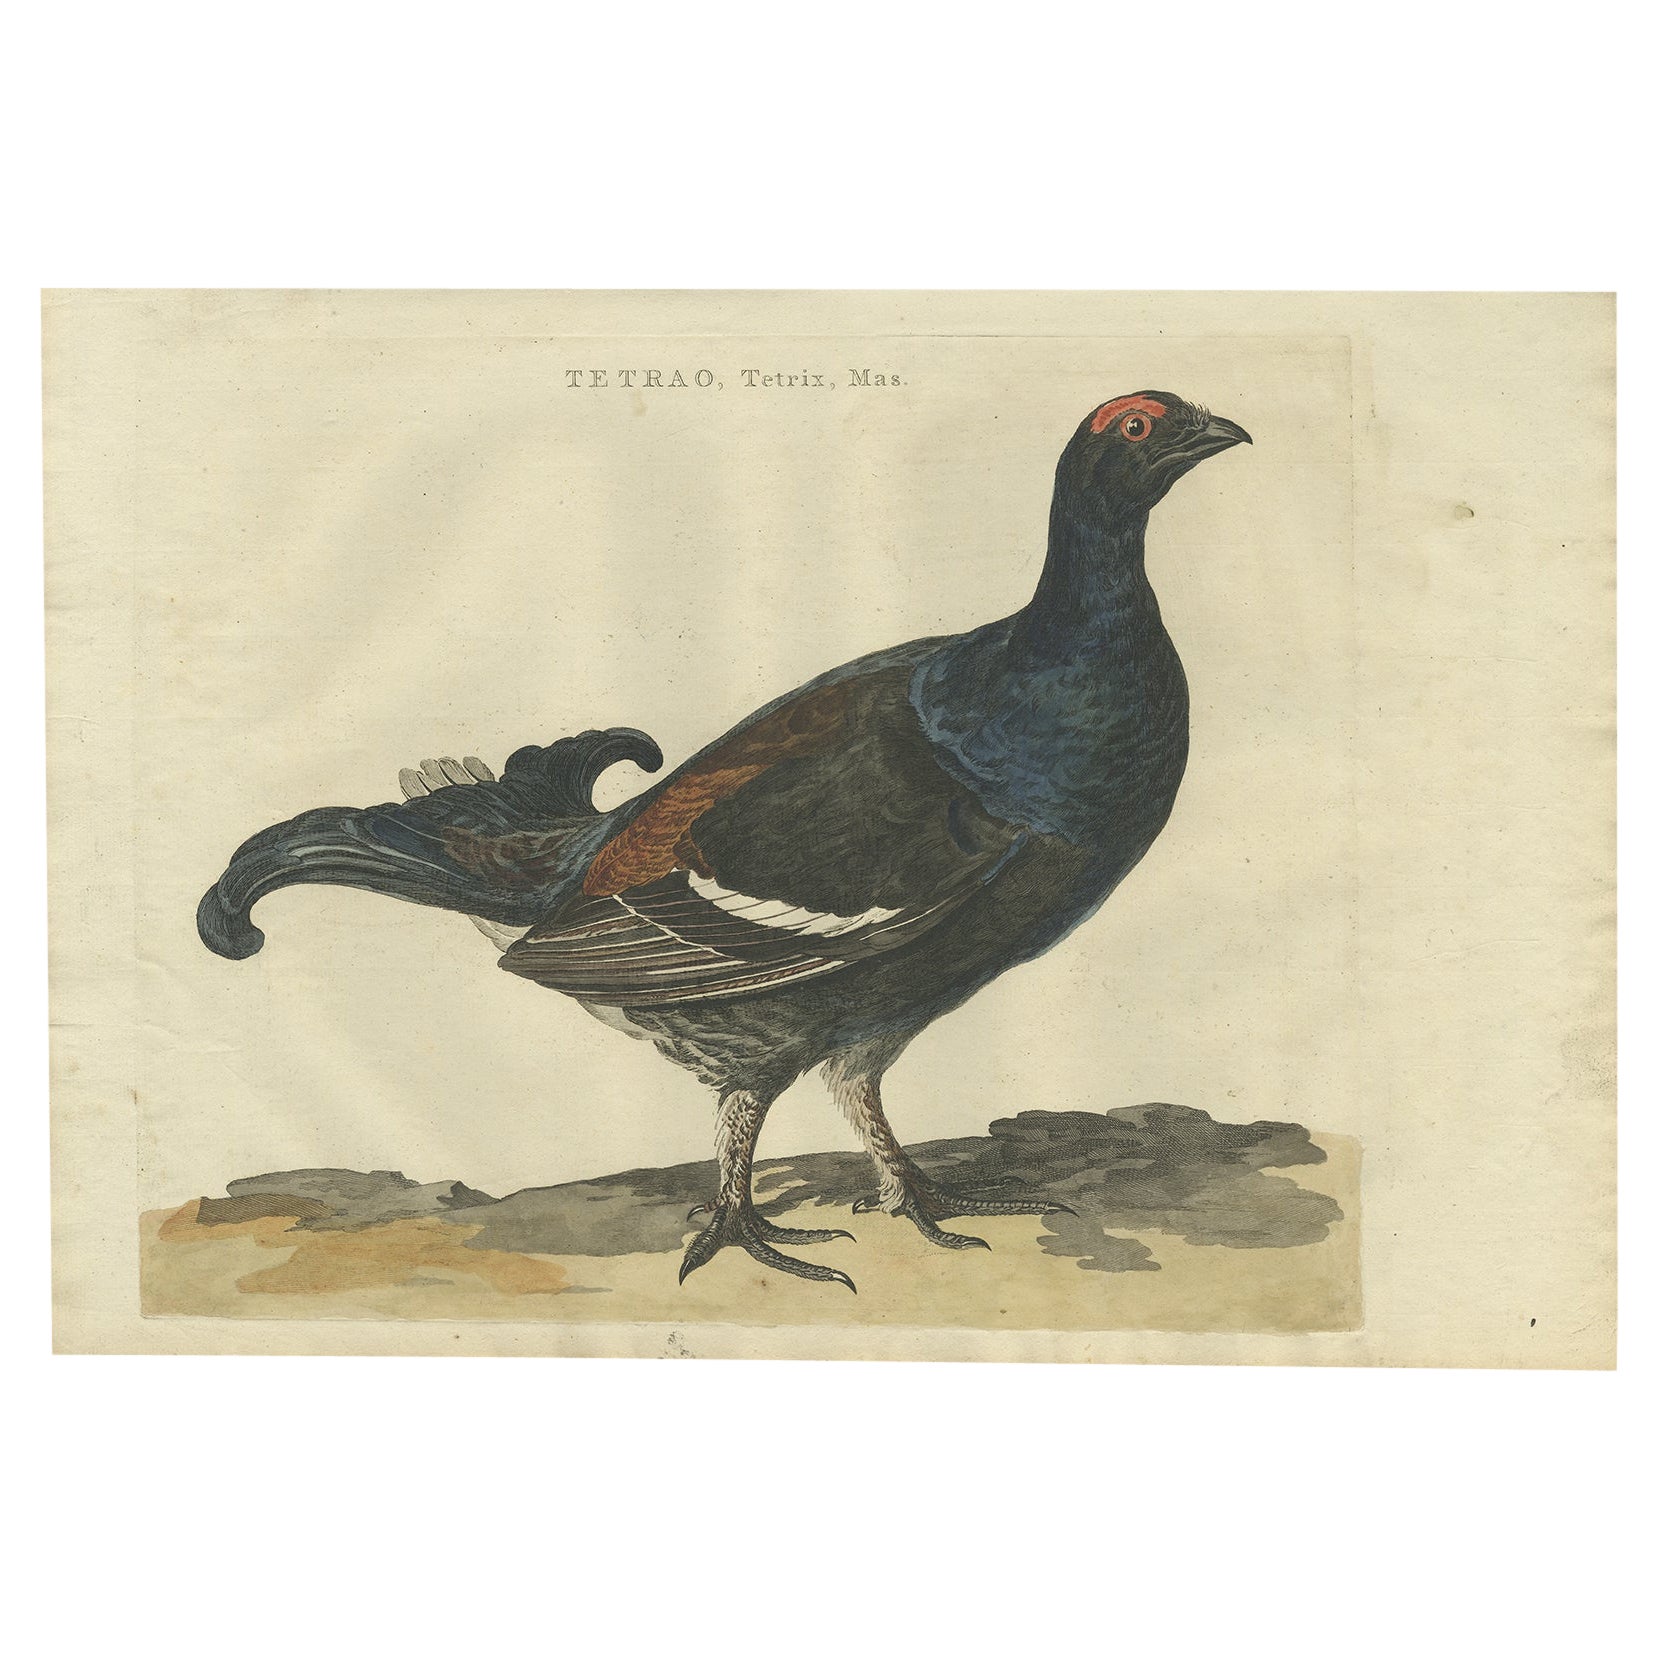 Antique Hand-Coloured Bird Print of the Male Black Grouse, 1789